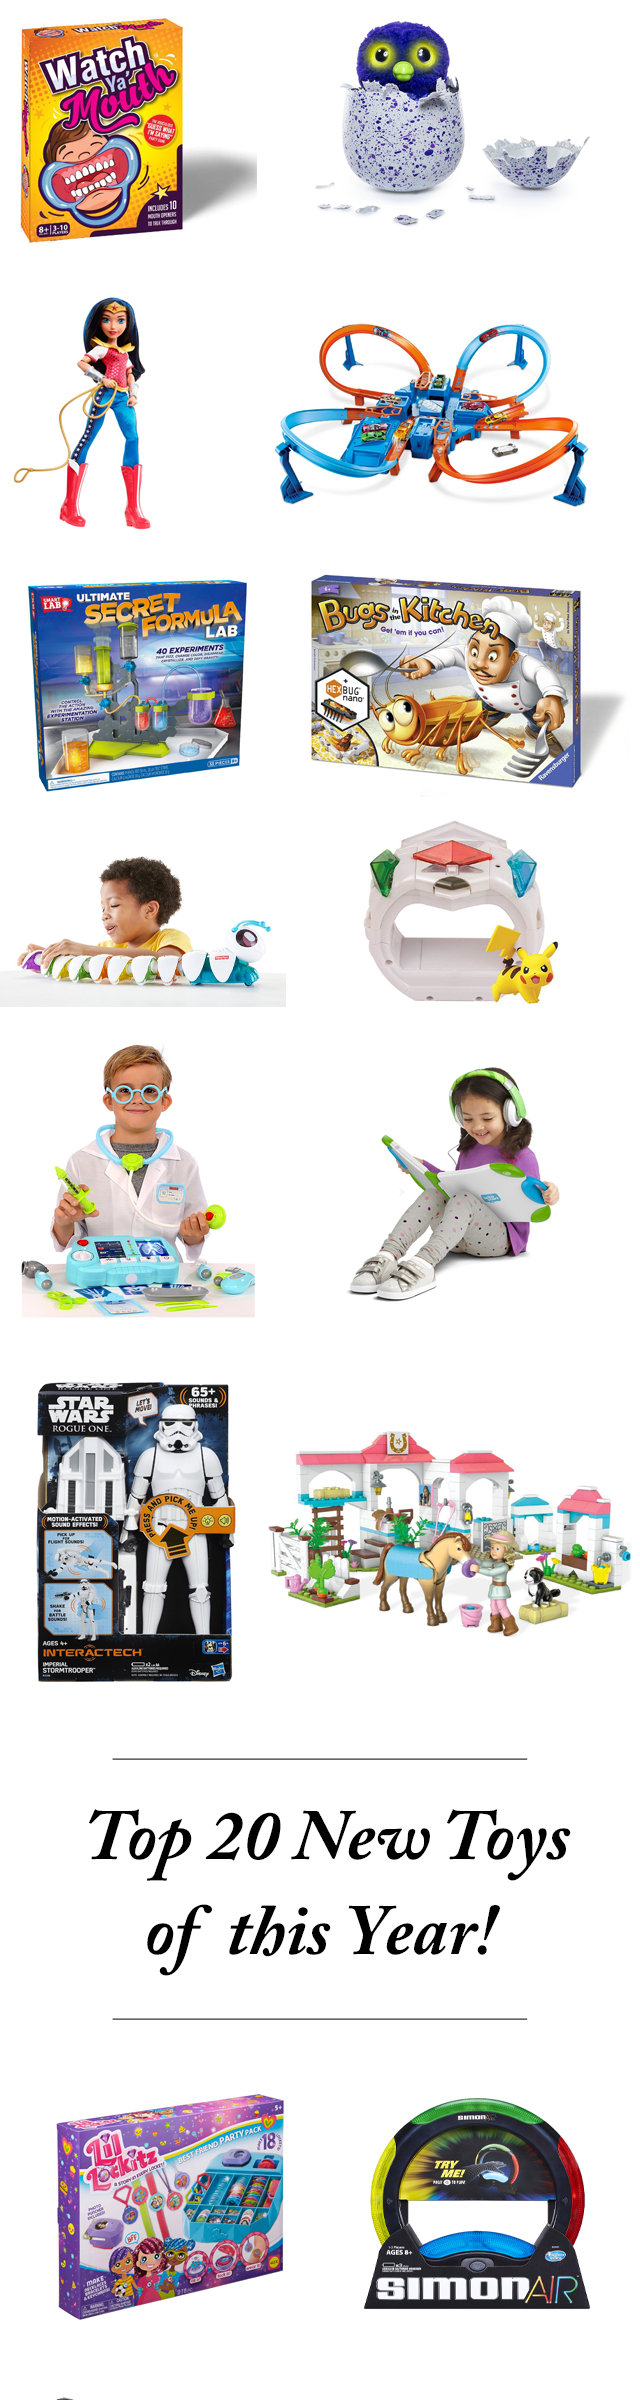 The famous MPMK gift guides are back! Here are the top 20 toys of the year - picked from a collection of 400+ toys that tens of thousands of parents shop from each year to find the best of the best for their kids!